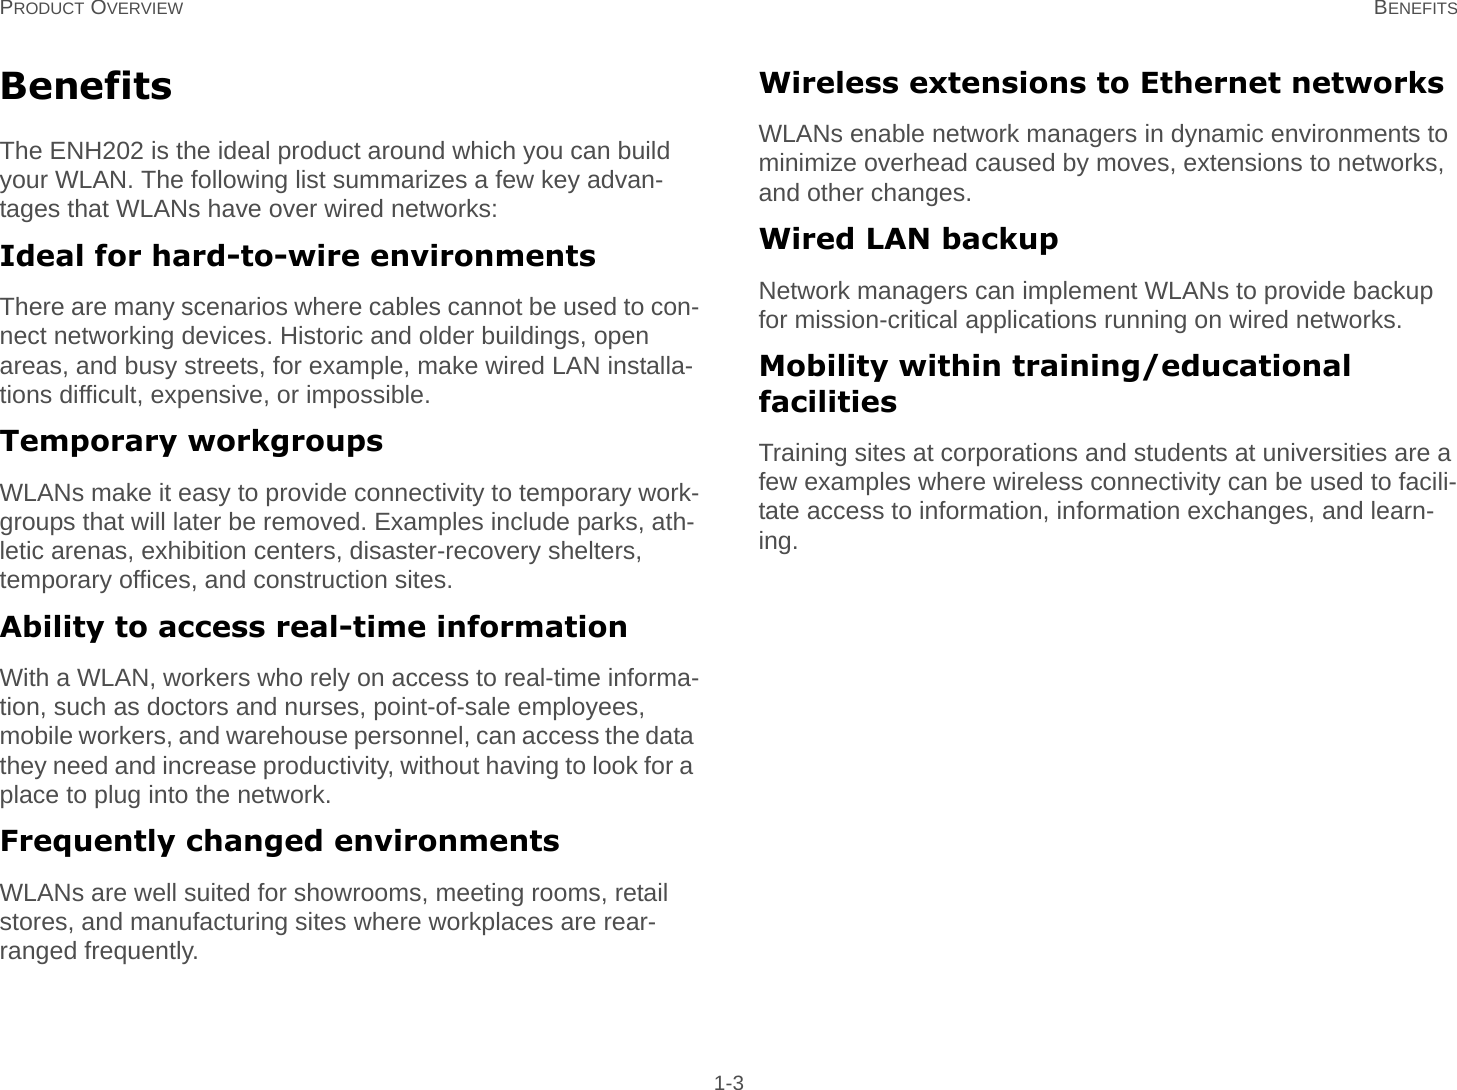 PRODUCT OVERVIEW BENEFITS 1-3BenefitsThe ENH202 is the ideal product around which you can build your WLAN. The following list summarizes a few key advan-tages that WLANs have over wired networks:Ideal for hard-to-wire environmentsThere are many scenarios where cables cannot be used to con-nect networking devices. Historic and older buildings, open areas, and busy streets, for example, make wired LAN installa-tions difficult, expensive, or impossible.Temporary workgroupsWLANs make it easy to provide connectivity to temporary work-groups that will later be removed. Examples include parks, ath-letic arenas, exhibition centers, disaster-recovery shelters, temporary offices, and construction sites.Ability to access real-time informationWith a WLAN, workers who rely on access to real-time informa-tion, such as doctors and nurses, point-of-sale employees, mobile workers, and warehouse personnel, can access the data they need and increase productivity, without having to look for a place to plug into the network.Frequently changed environmentsWLANs are well suited for showrooms, meeting rooms, retail stores, and manufacturing sites where workplaces are rear-ranged frequently.Wireless extensions to Ethernet networksWLANs enable network managers in dynamic environments to minimize overhead caused by moves, extensions to networks, and other changes.Wired LAN backupNetwork managers can implement WLANs to provide backup for mission-critical applications running on wired networks.Mobility within training/educational facilitiesTraining sites at corporations and students at universities are a few examples where wireless connectivity can be used to facili-tate access to information, information exchanges, and learn-ing.